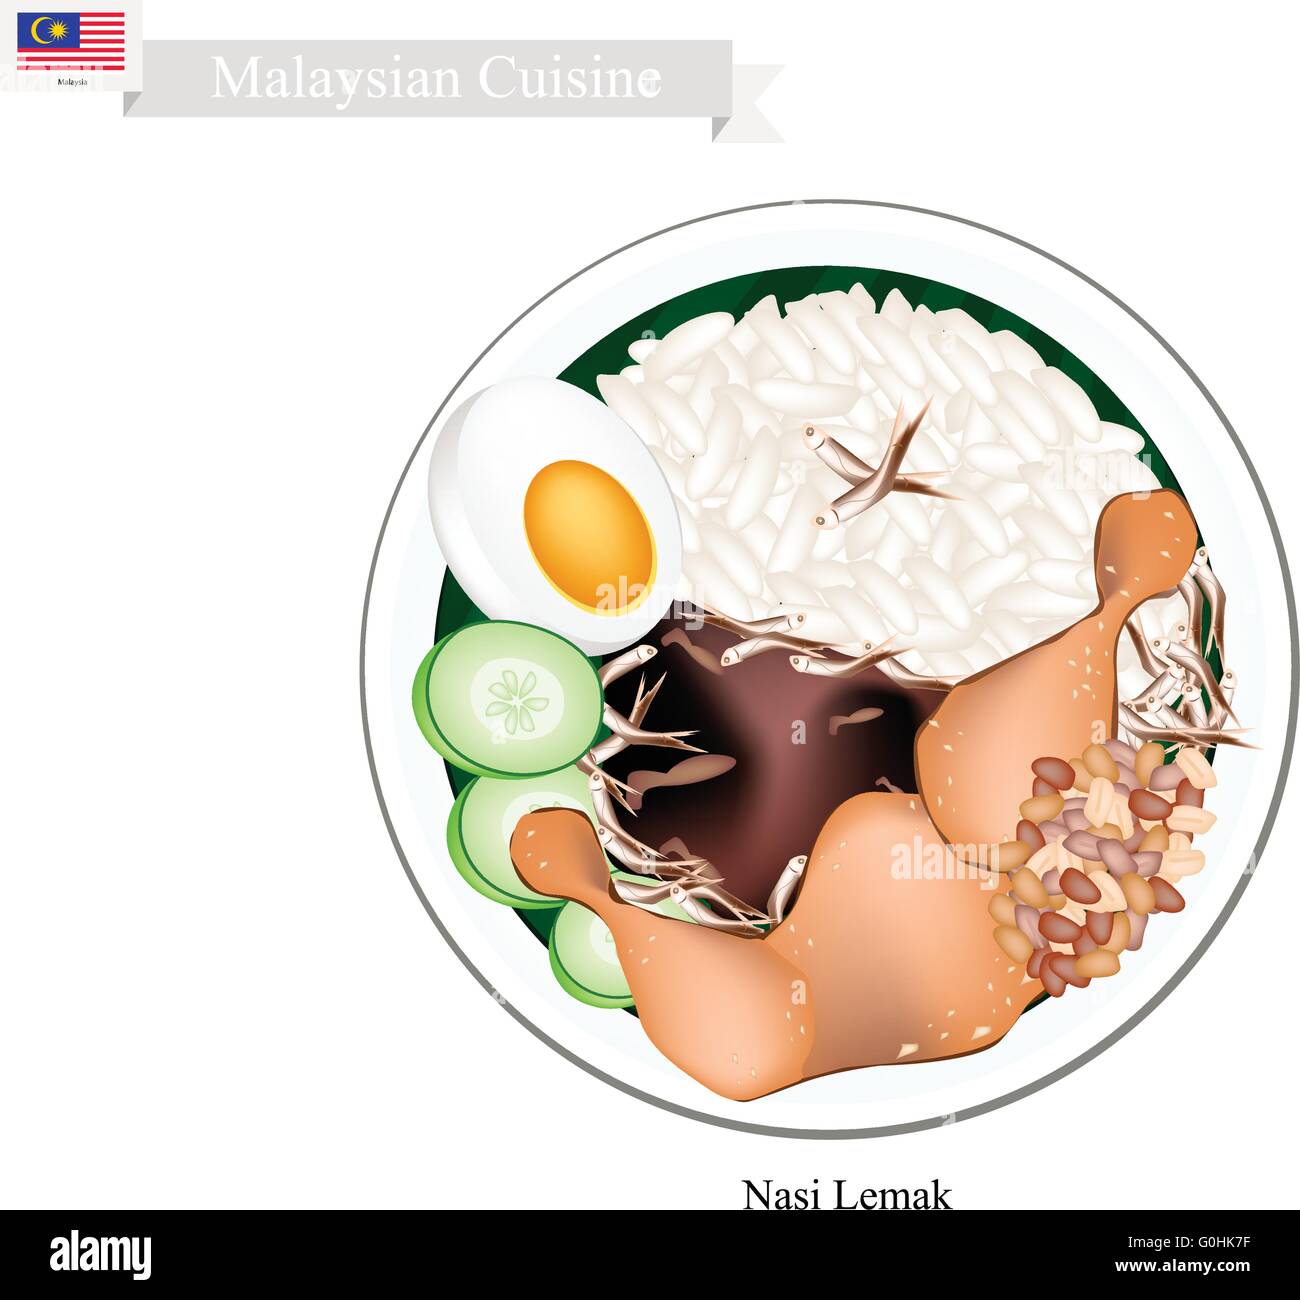 Malaysian Cuisine, Nasi Lemak or Steamed Rice Cooked in Coconut Milk Served with Fried Chicken, Boil Egg, Anchovies, Peanut and Stock Vector